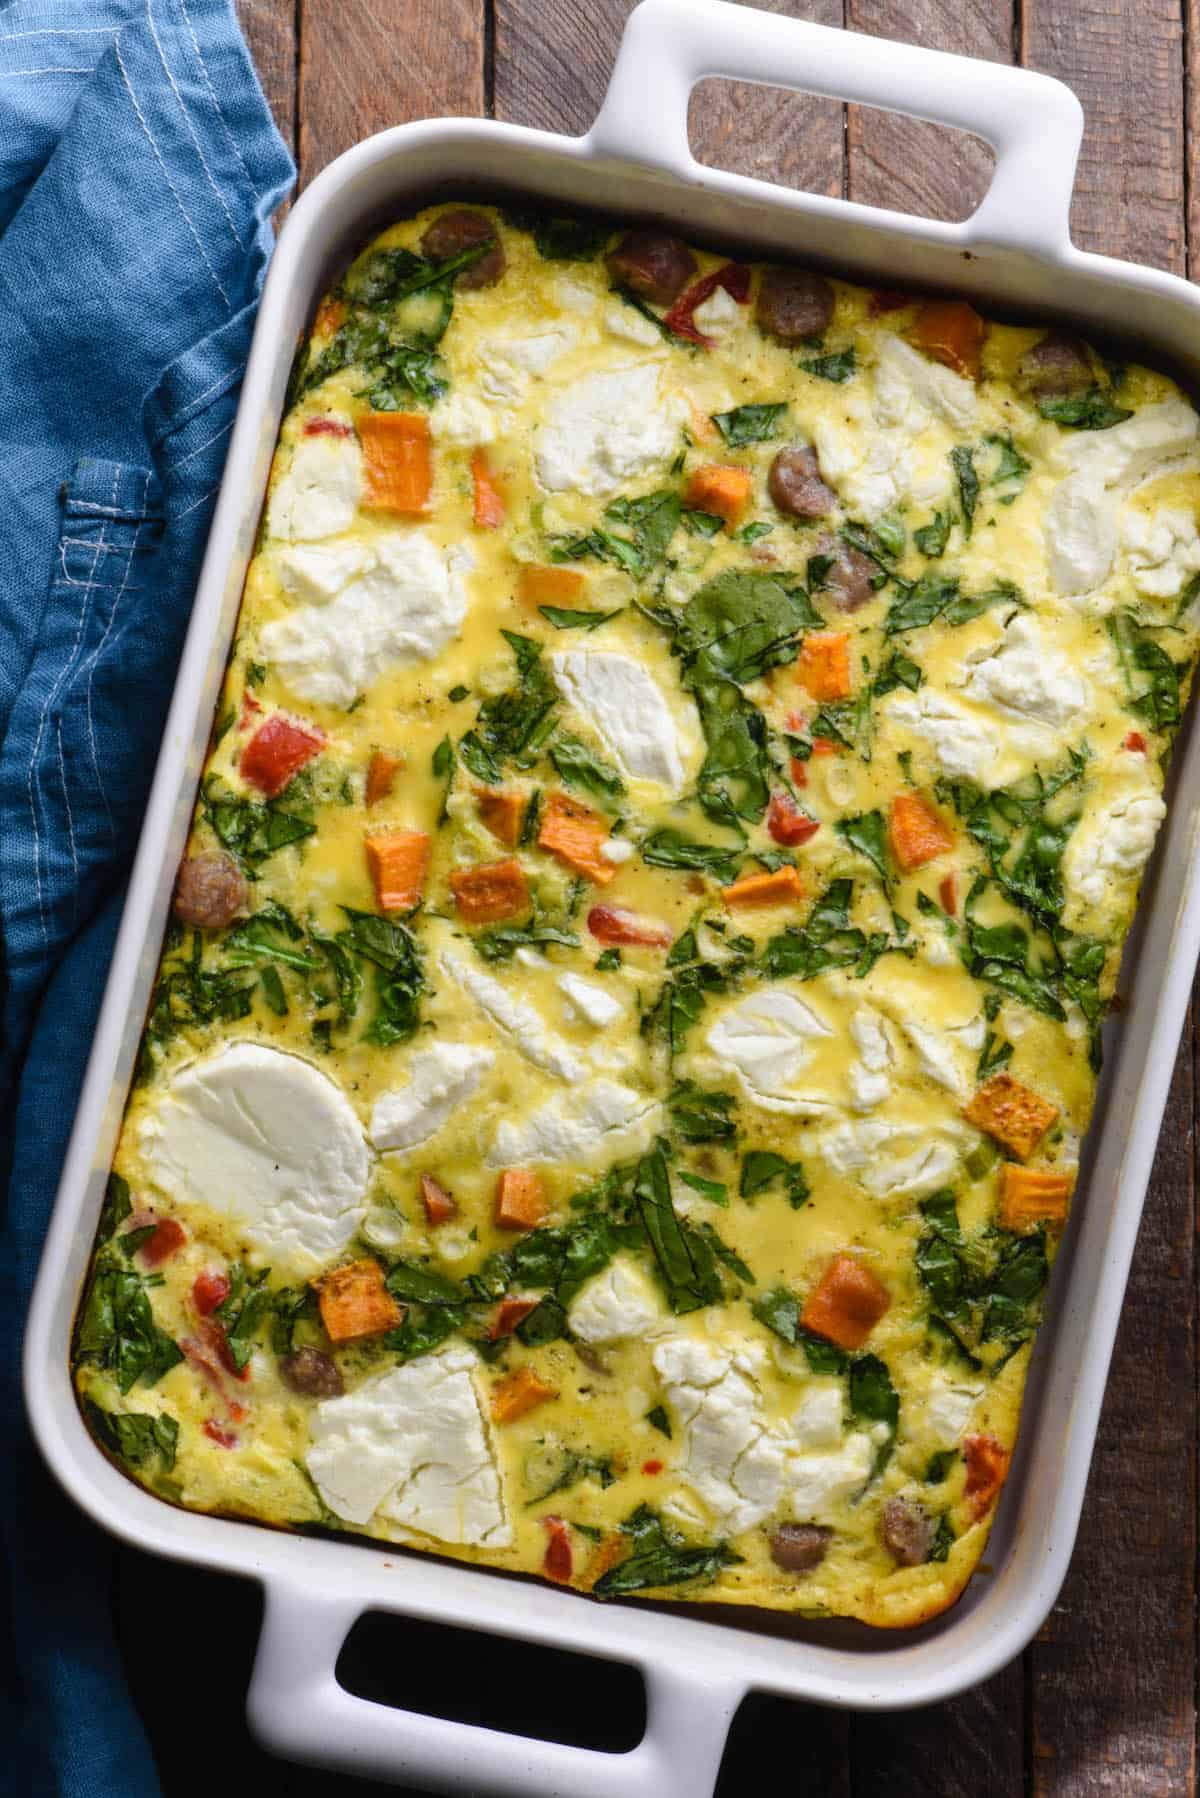 Breakfast casserole made with sweet potatoes, sausage, spinach and goat cheese, in rectangular white baking dish.